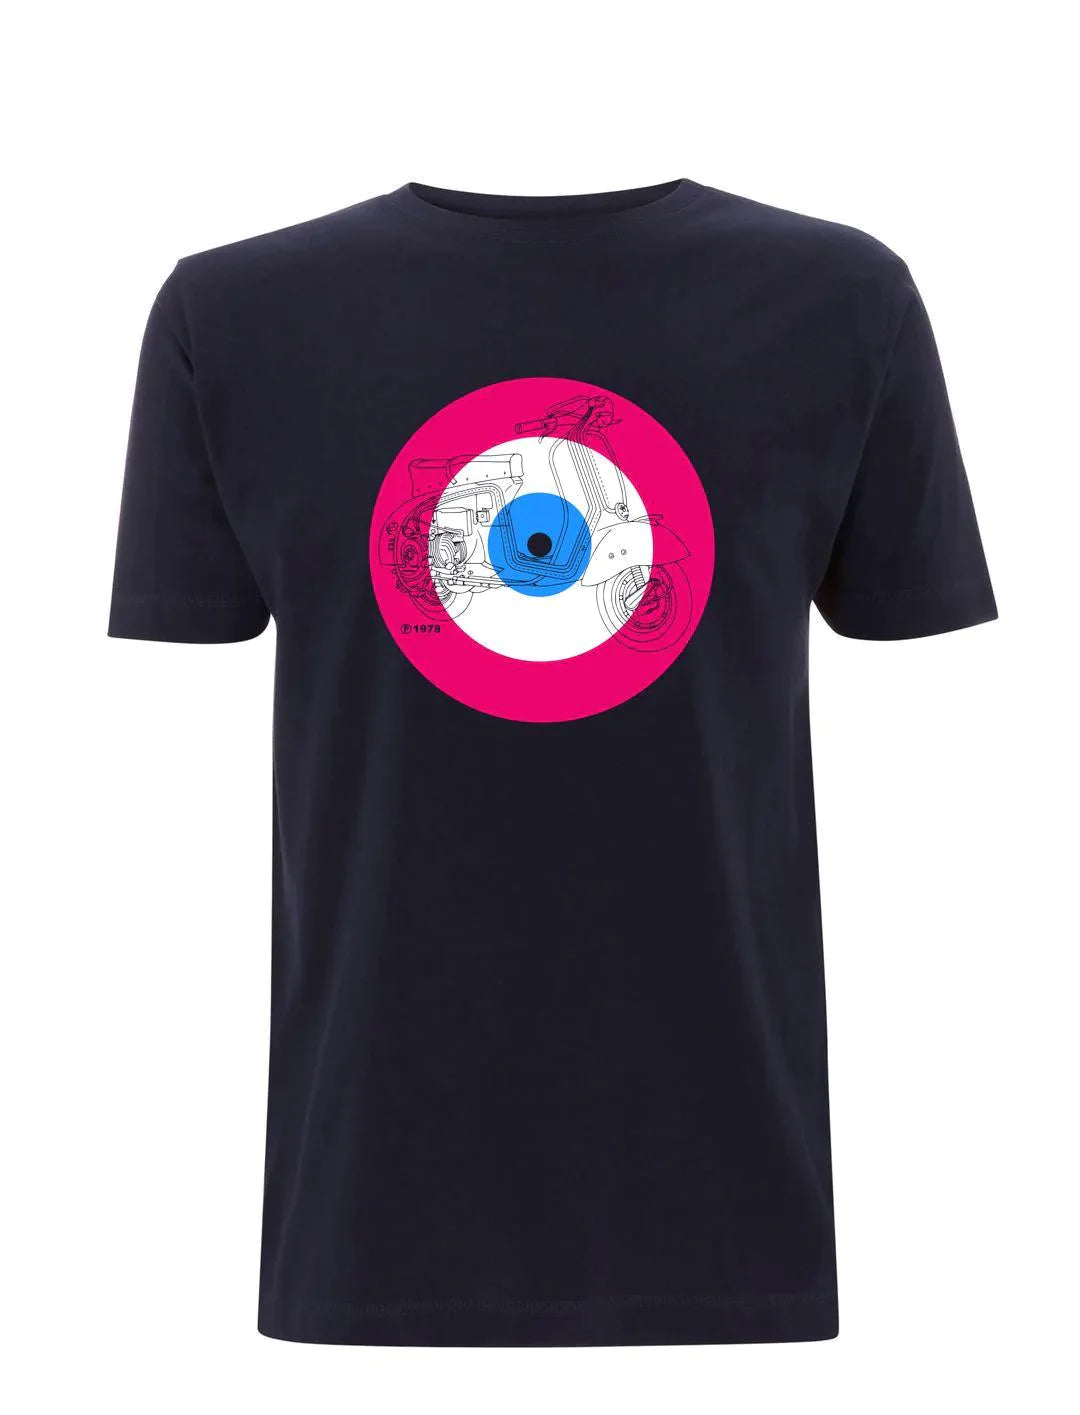 1978: T-Shirt Inspired by The Jam & Mod Culture - SOUND IS COLOUR